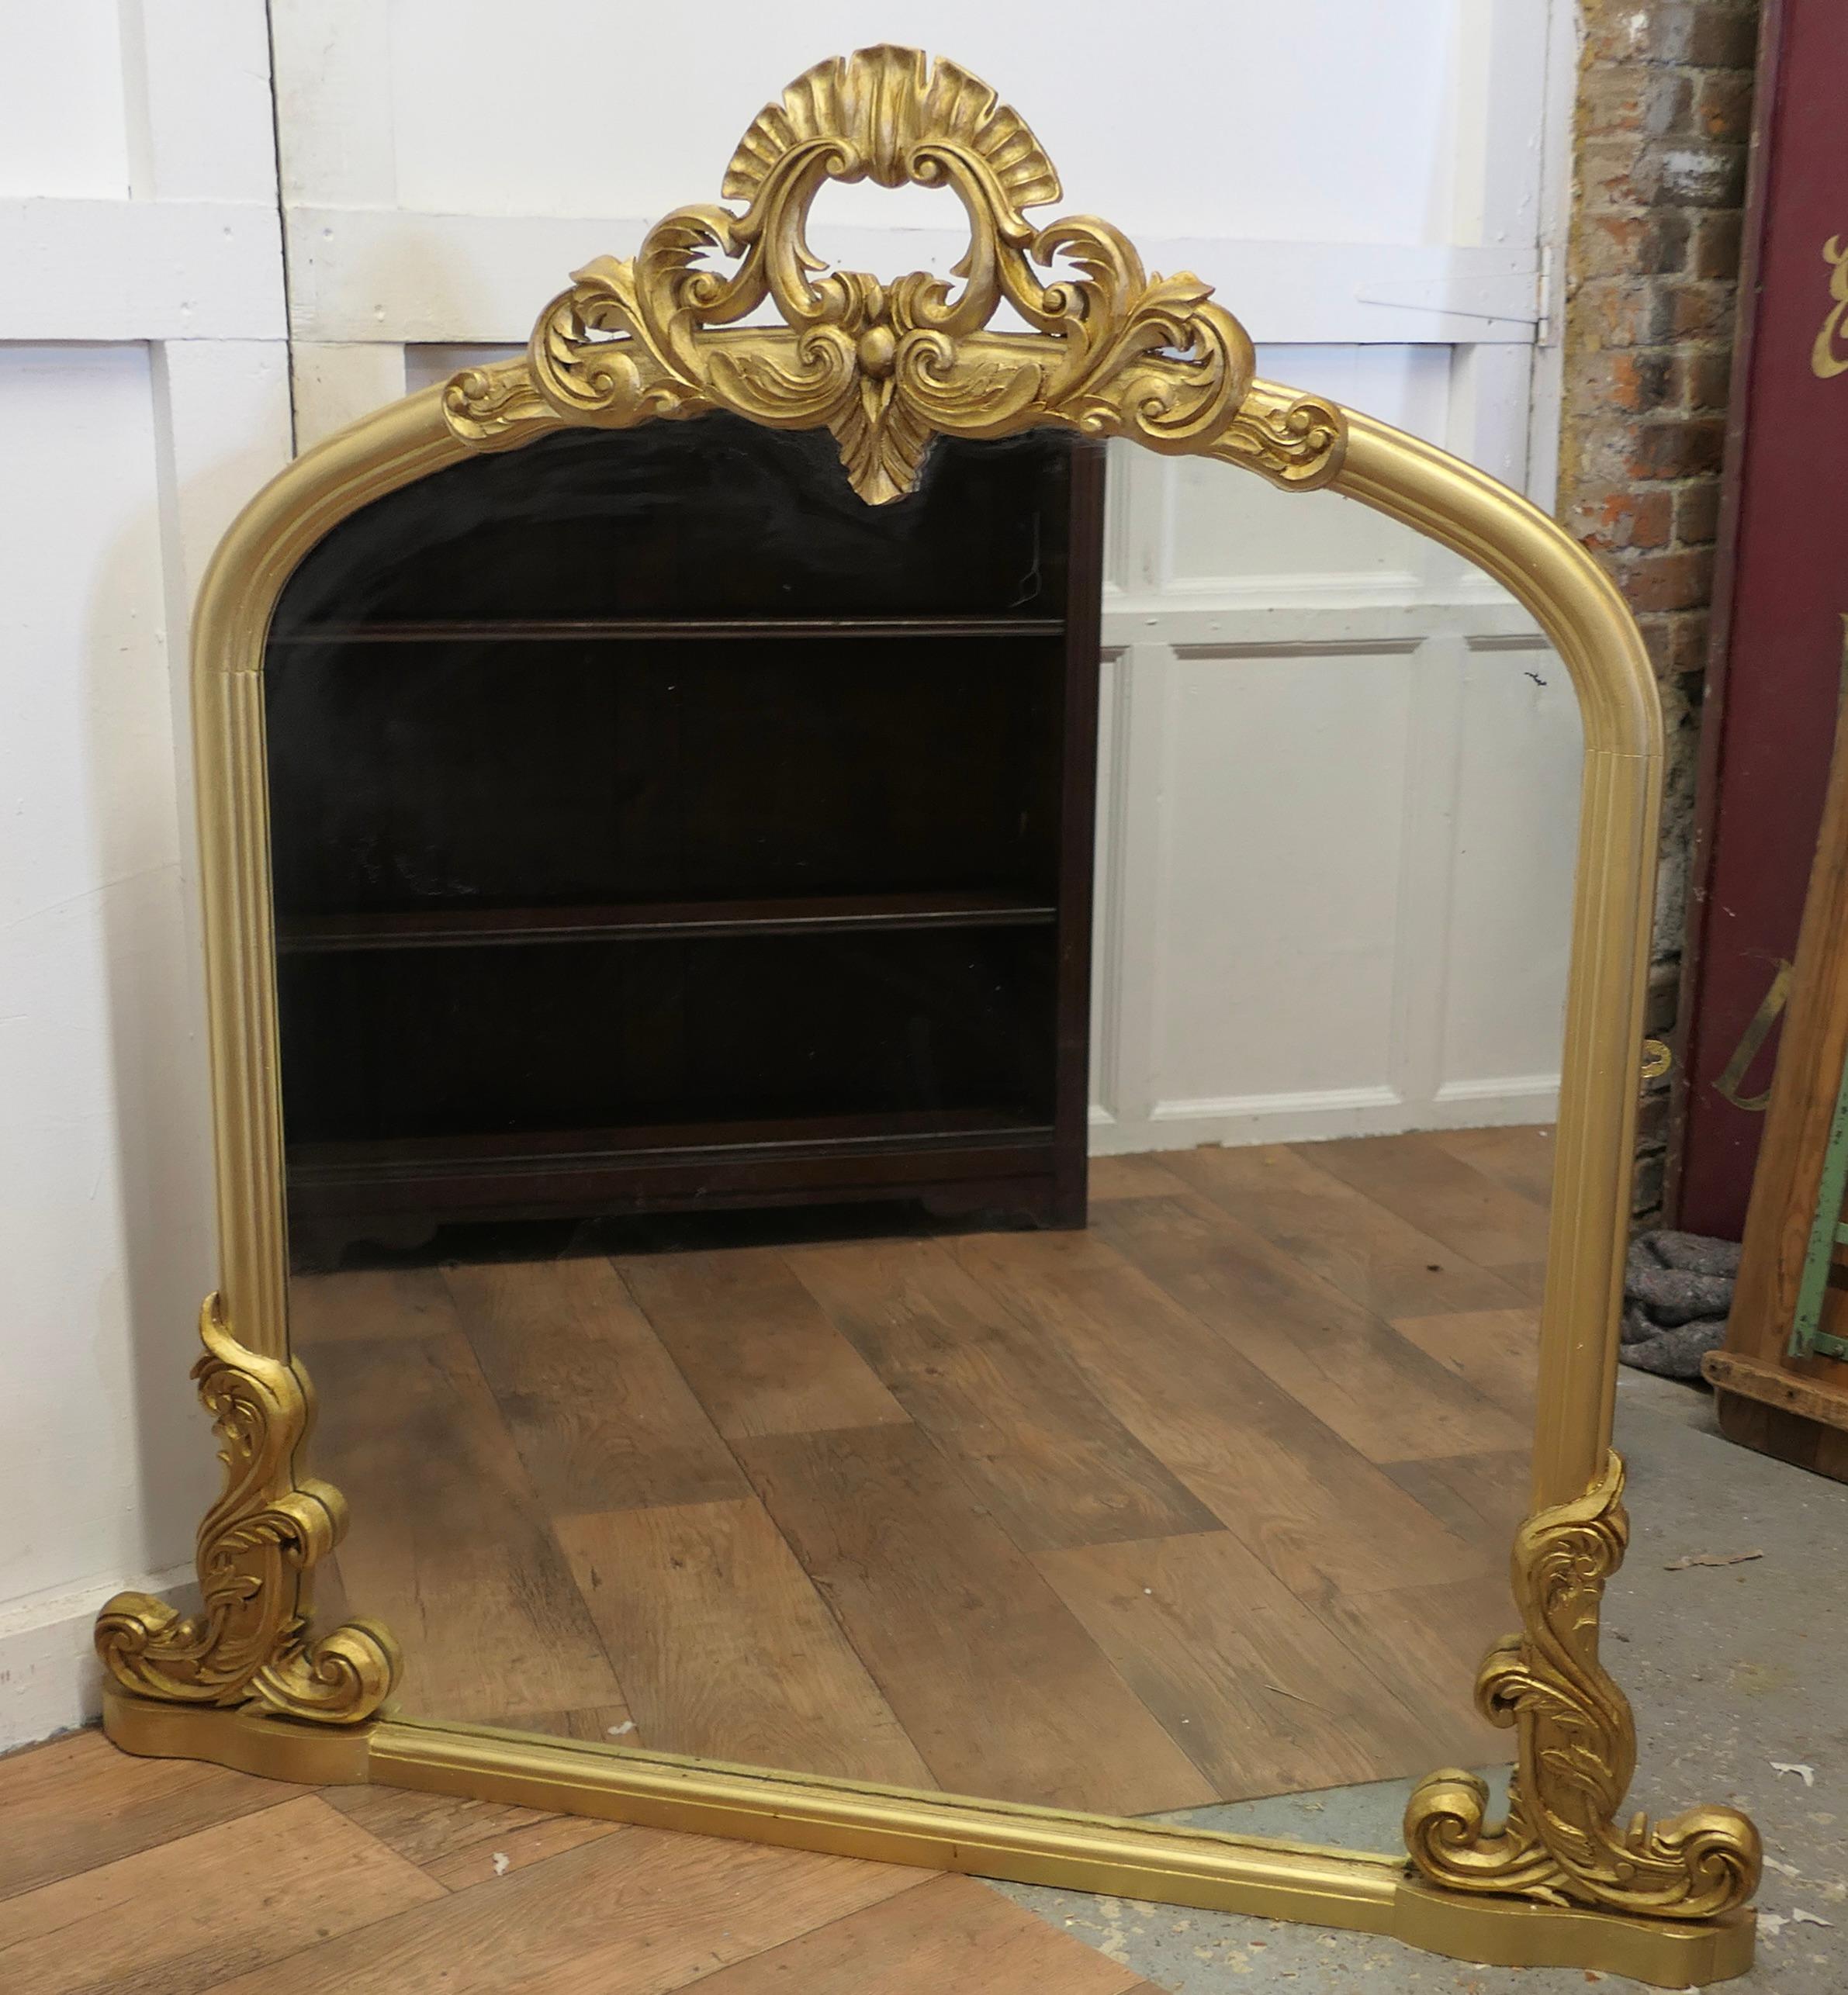 Large Gilt Rococo Style Arched Over Mantle Mirror  

This is a very decorative piece the mirror has a beautiful Rococo Gilt Frame with a 11” high carved central decoration which matches the swags at the base
The large Arched frame is in good sound